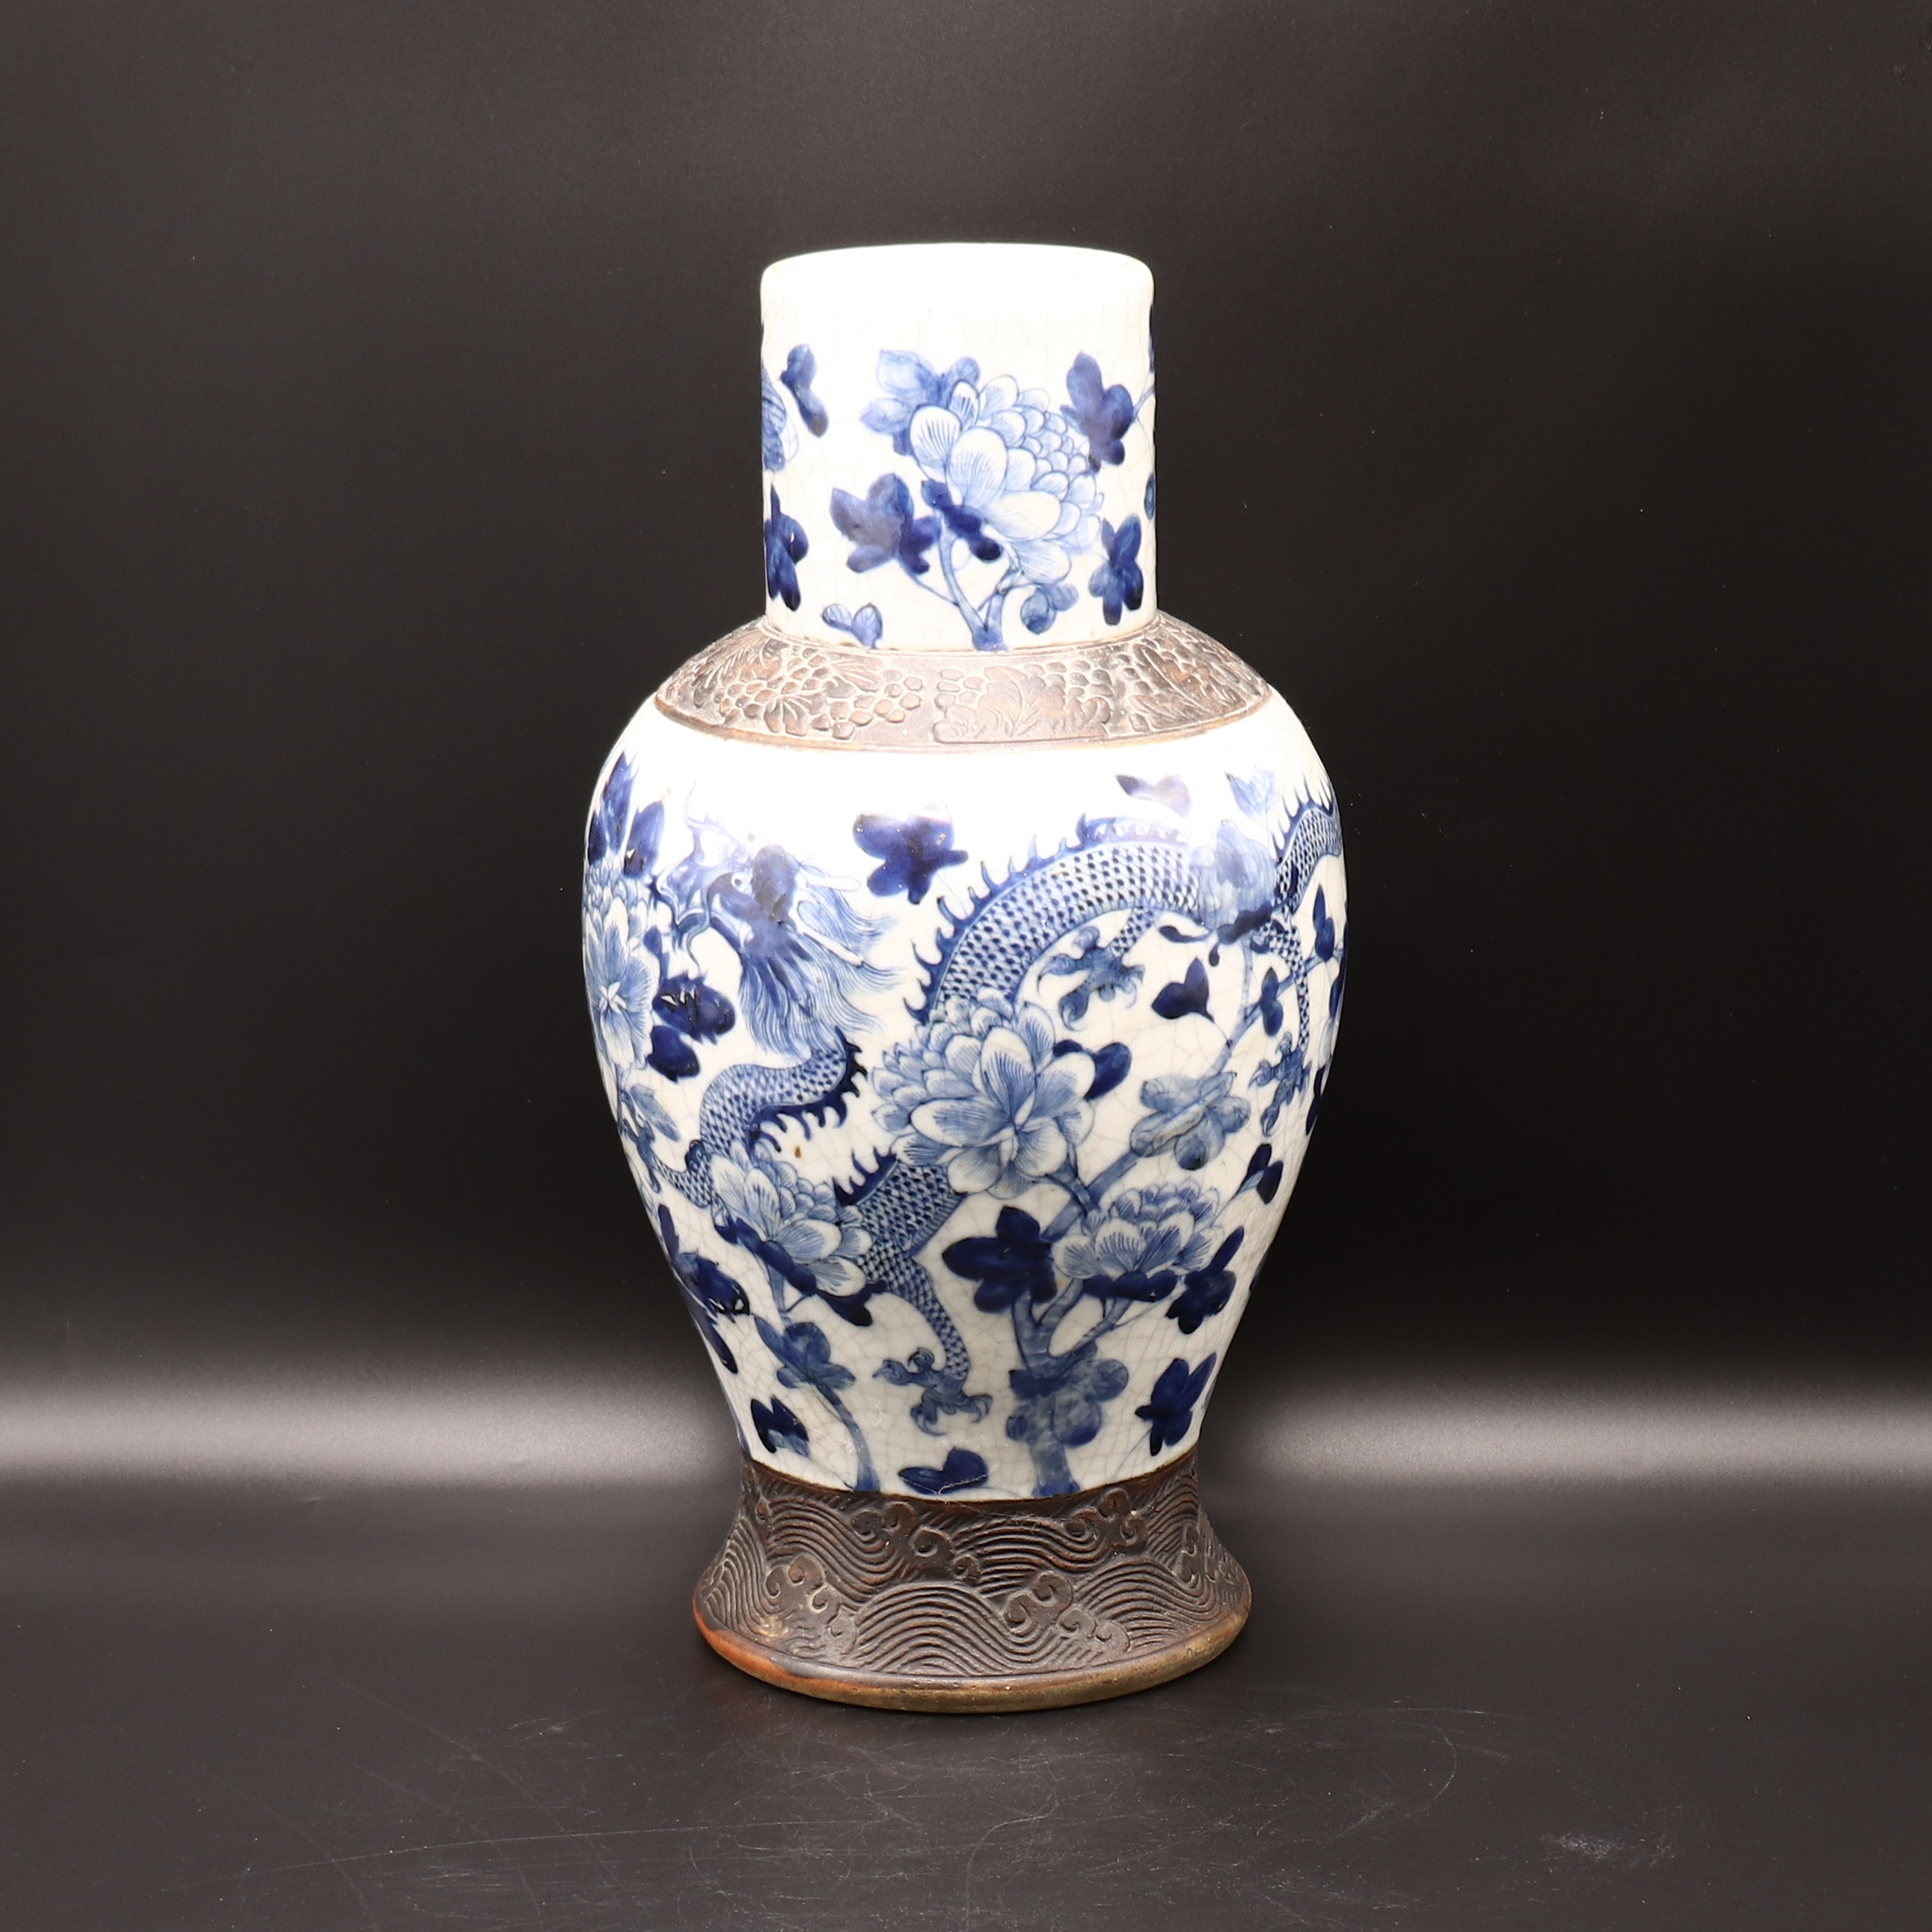 A CHINESE BLUE & WHITE CRACKLE VASE DEPICTING DRAGONS, 19TH CENTURY - Image 4 of 8